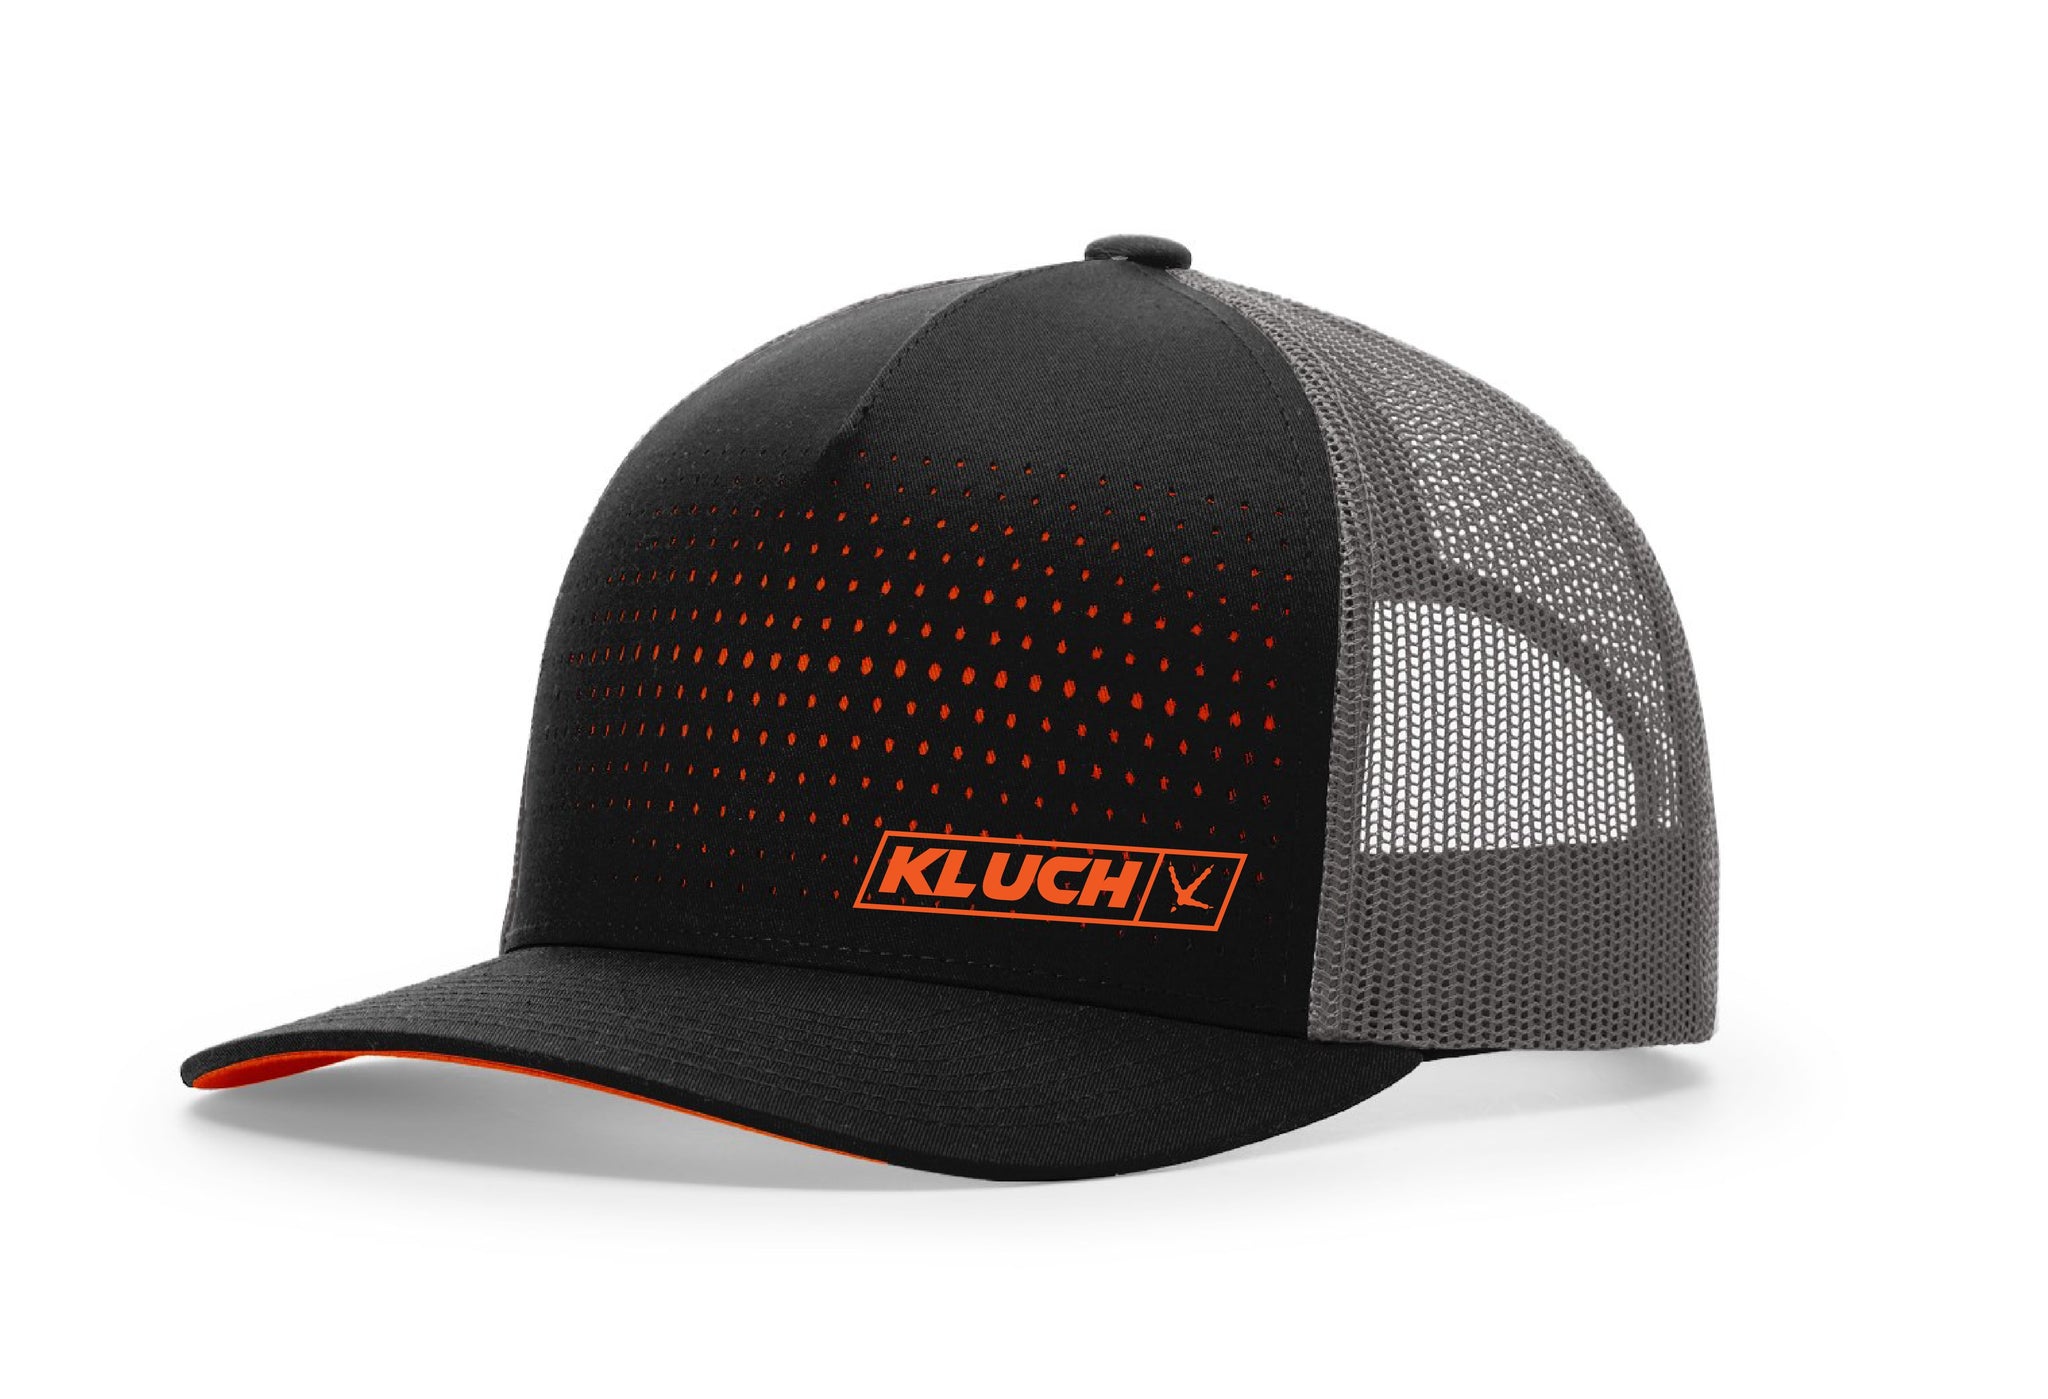 Hats - Kluch Adjustable Kluch Apparel